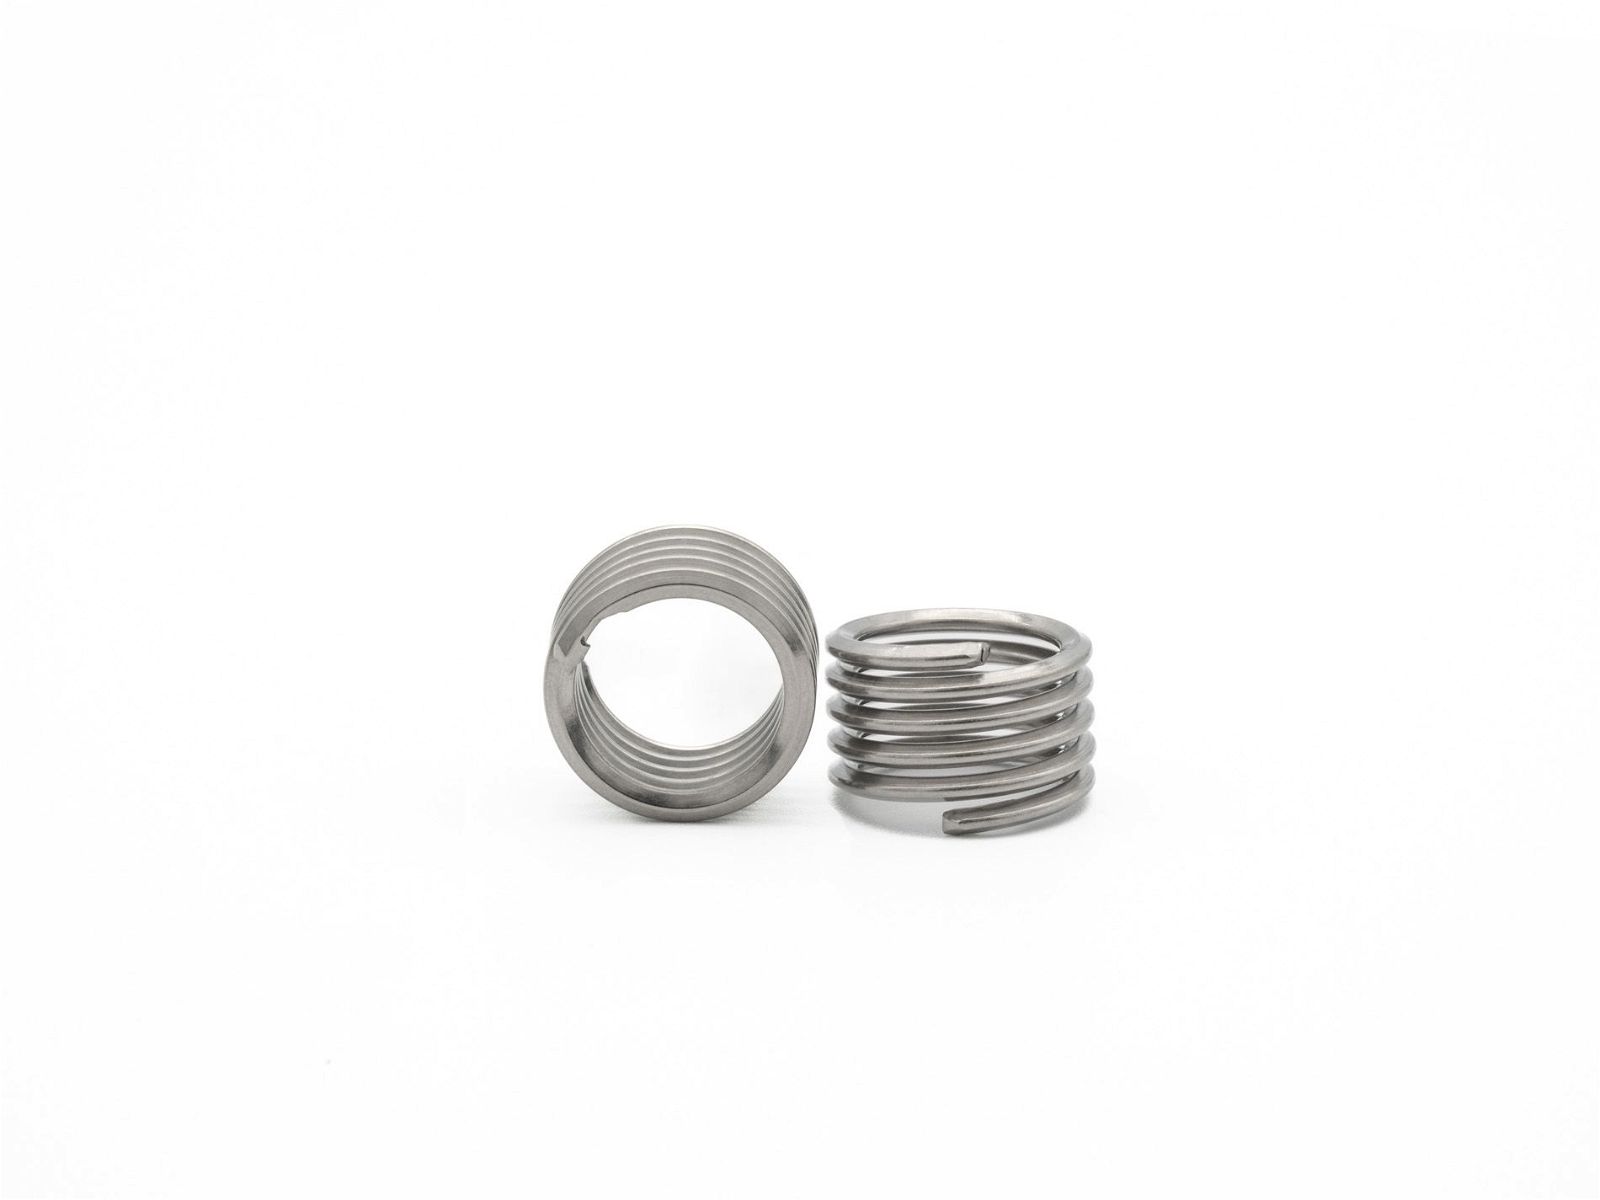 BaerCoil NoTang Wire Thread Inserts M 4 x 0.7 - 1.0 D (4 mm) - 100 pcs.